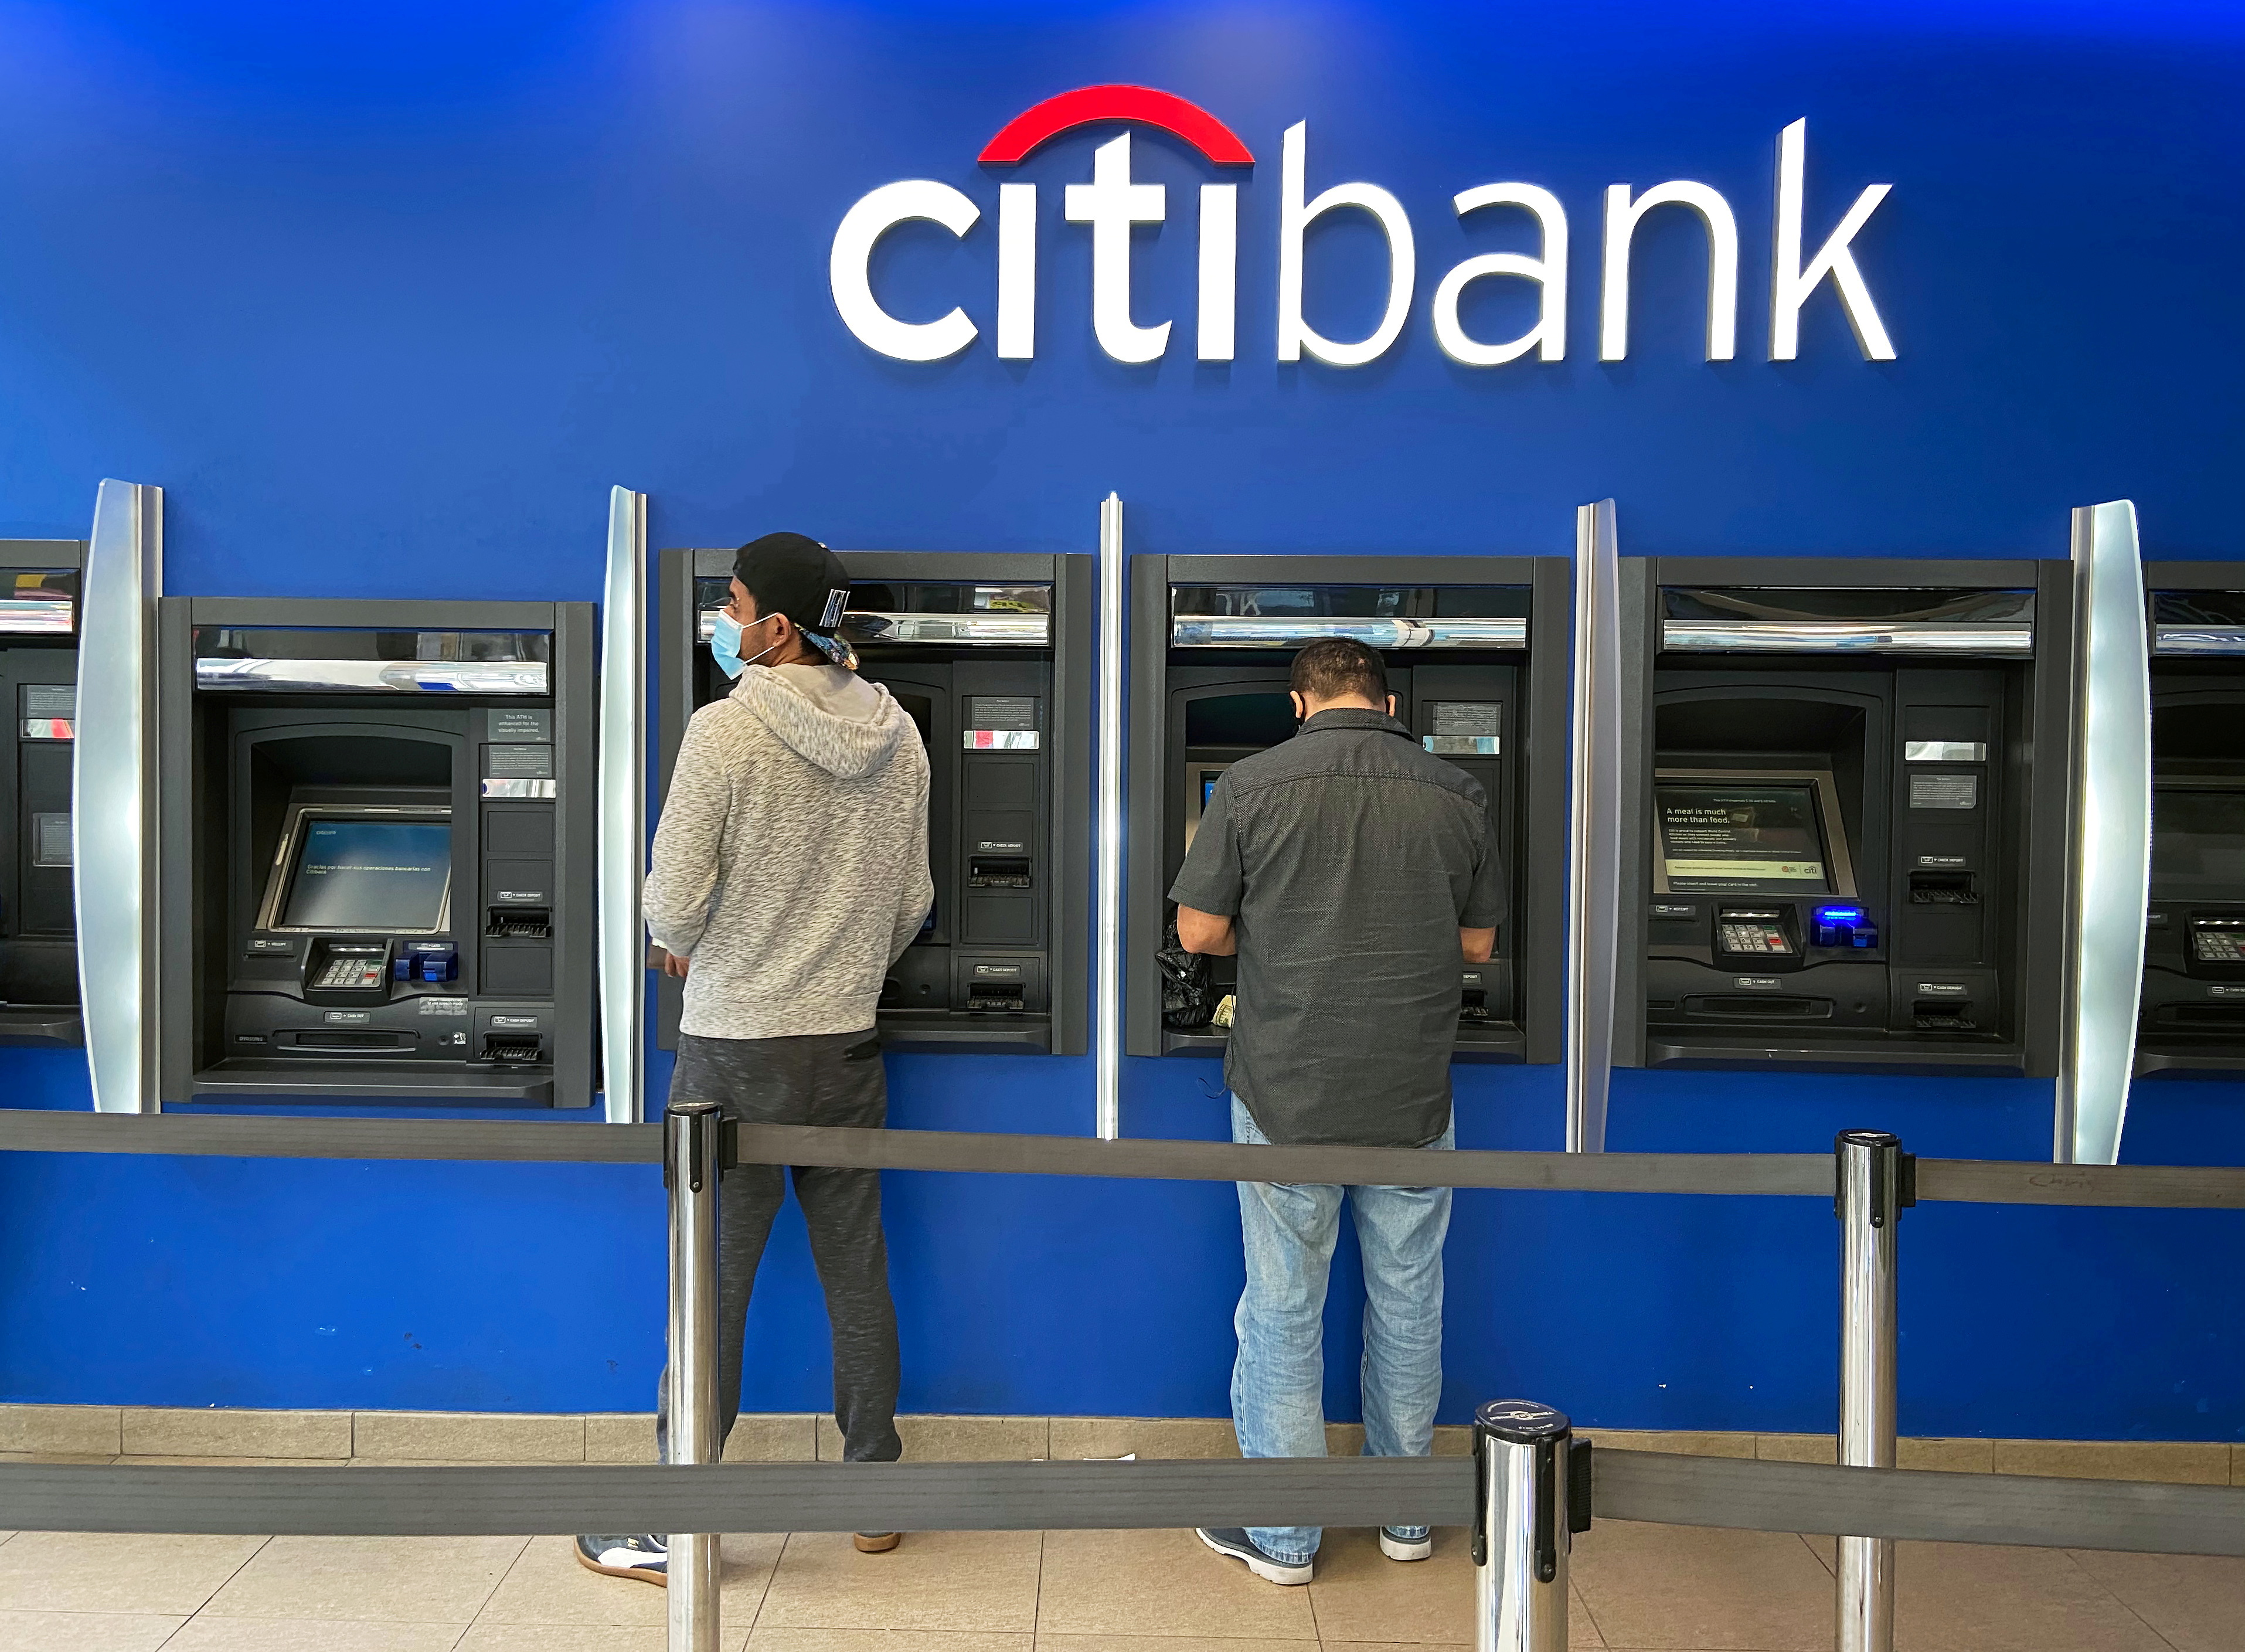 Customers use ATMs at Citibank branch in New York City